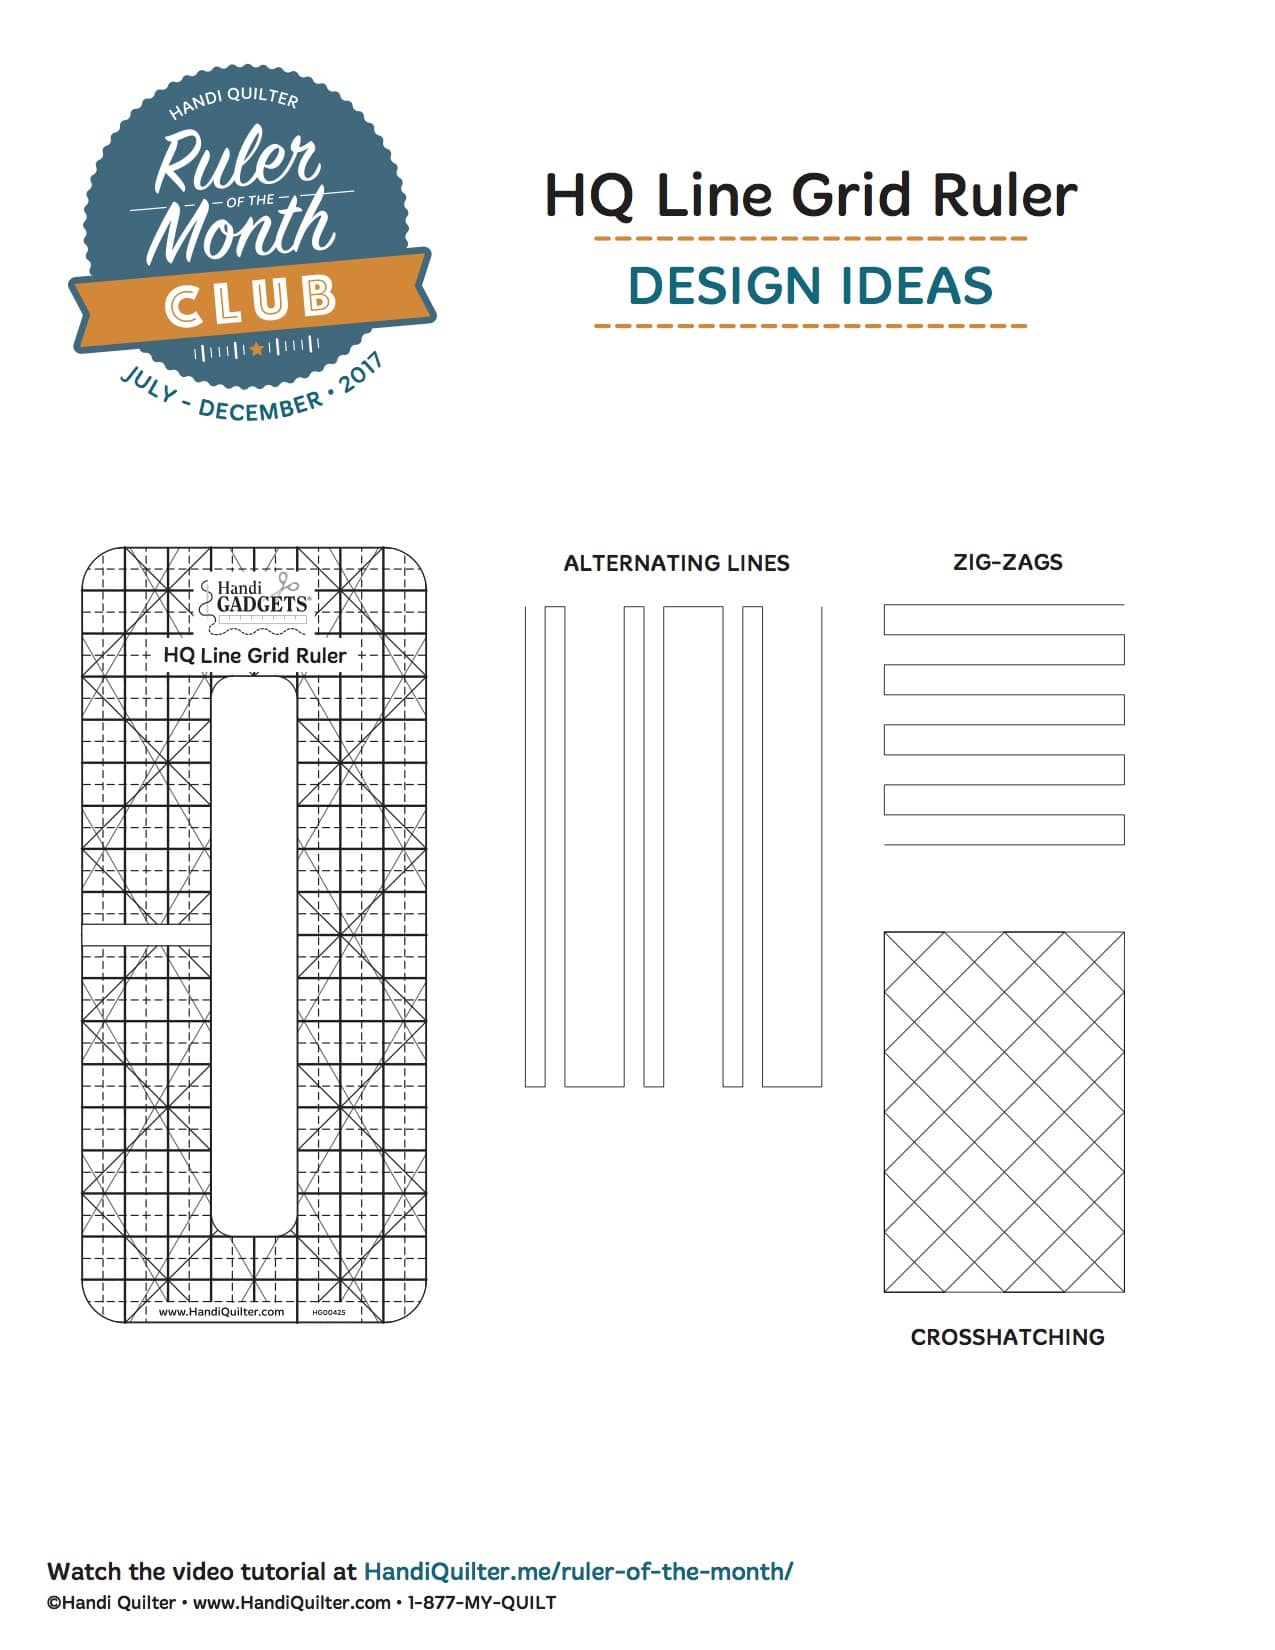 HQ-Monthly-Ruler-Club-LineGrid-Designs[1]